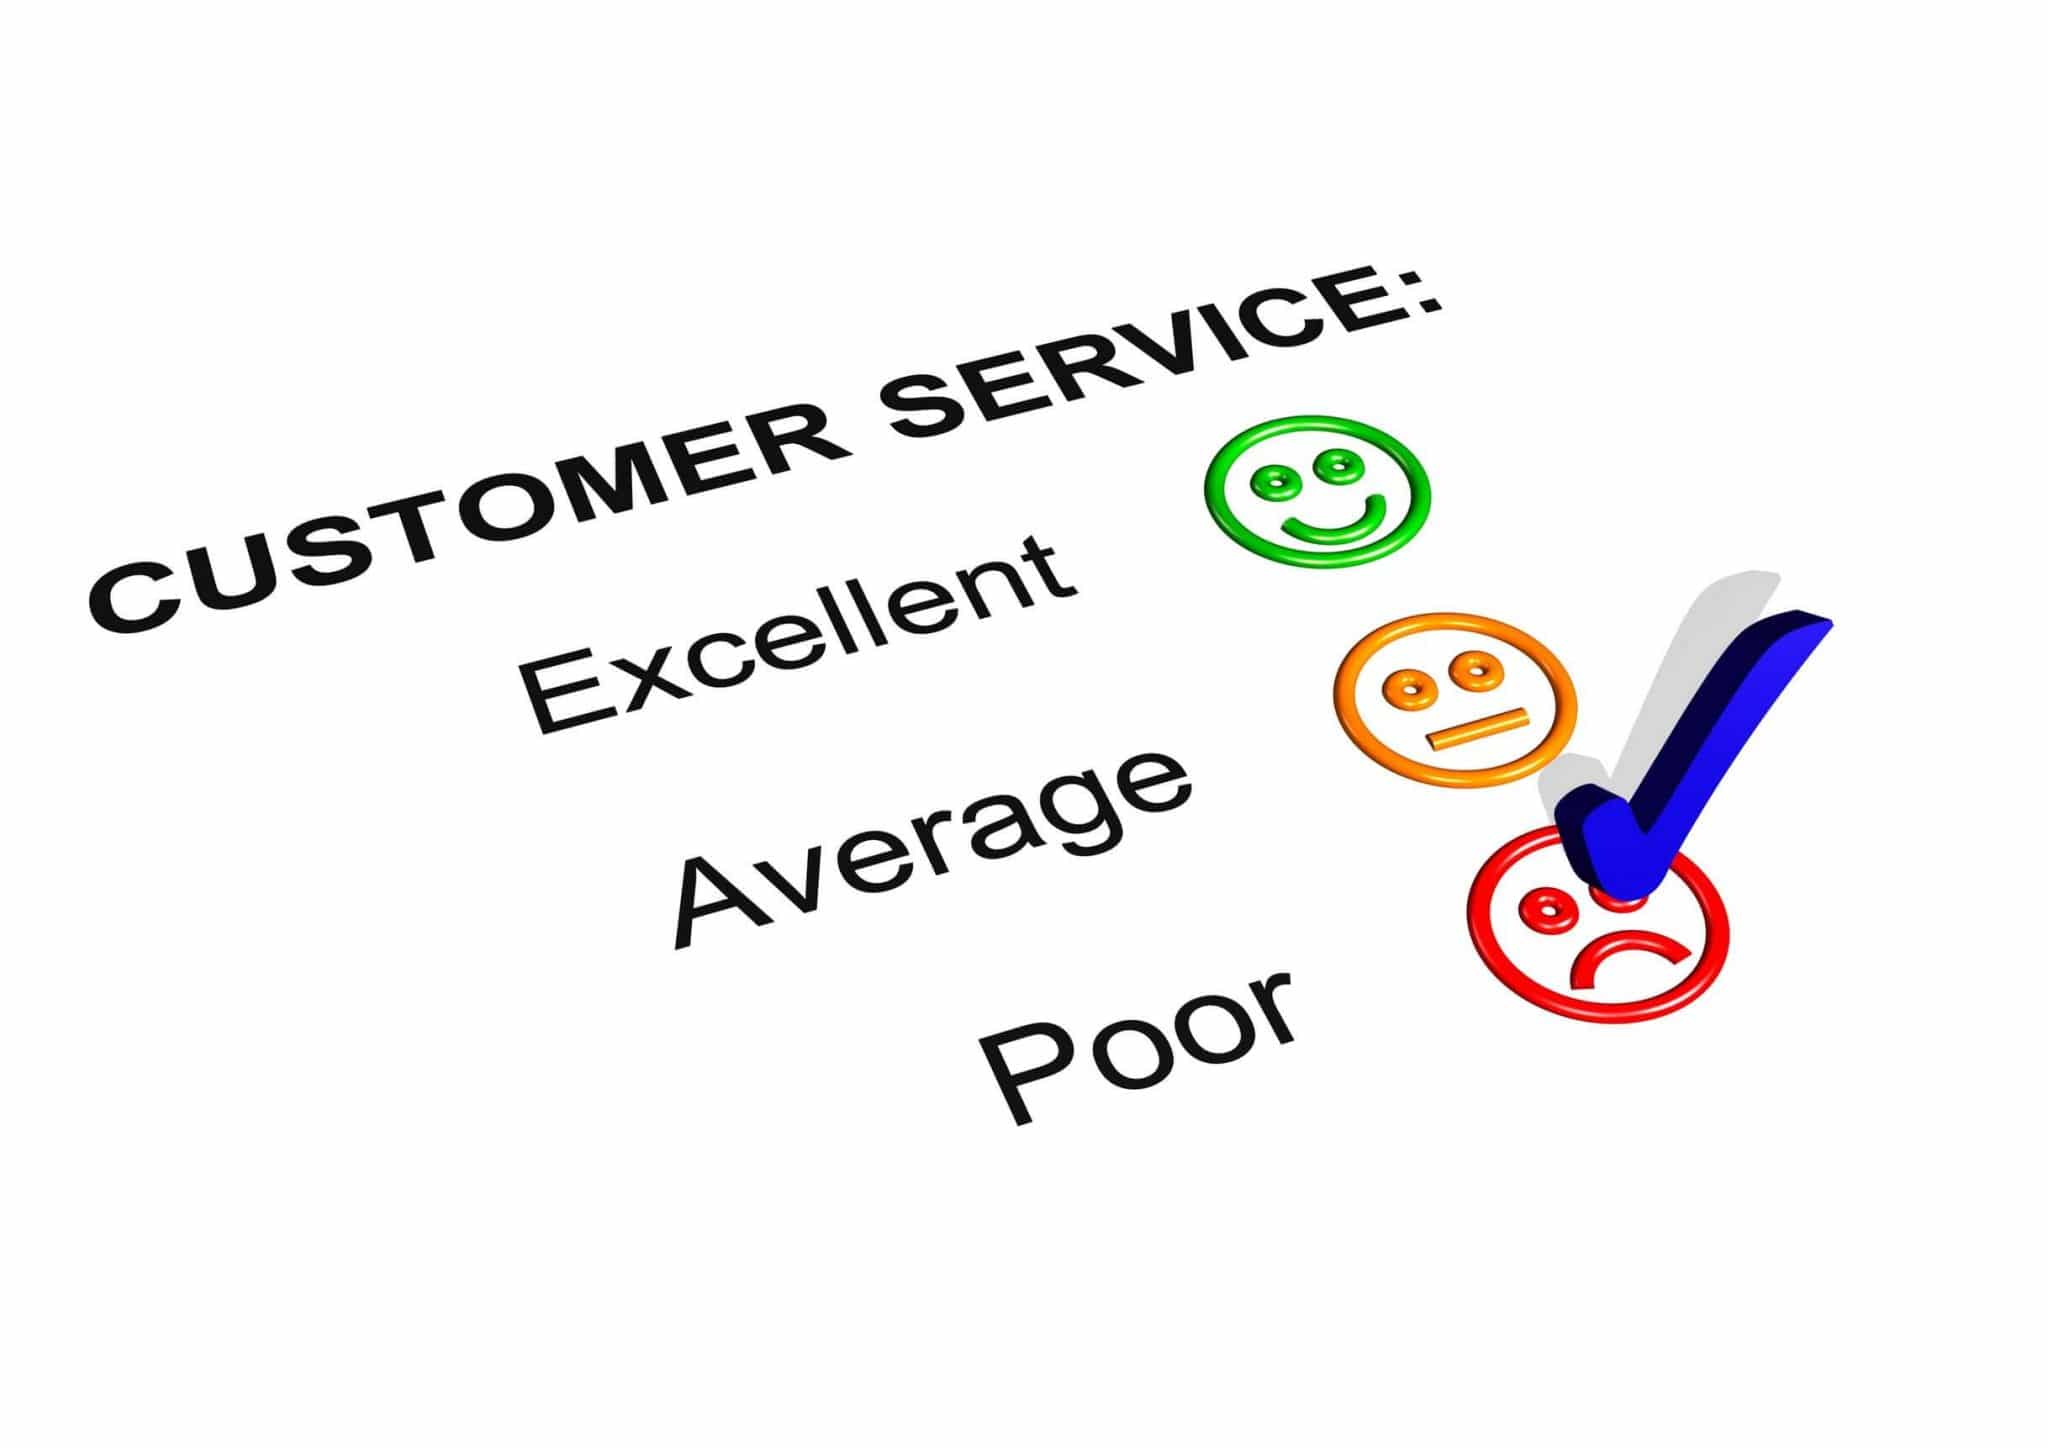 How to Use Social Media for Outstanding Customer Service